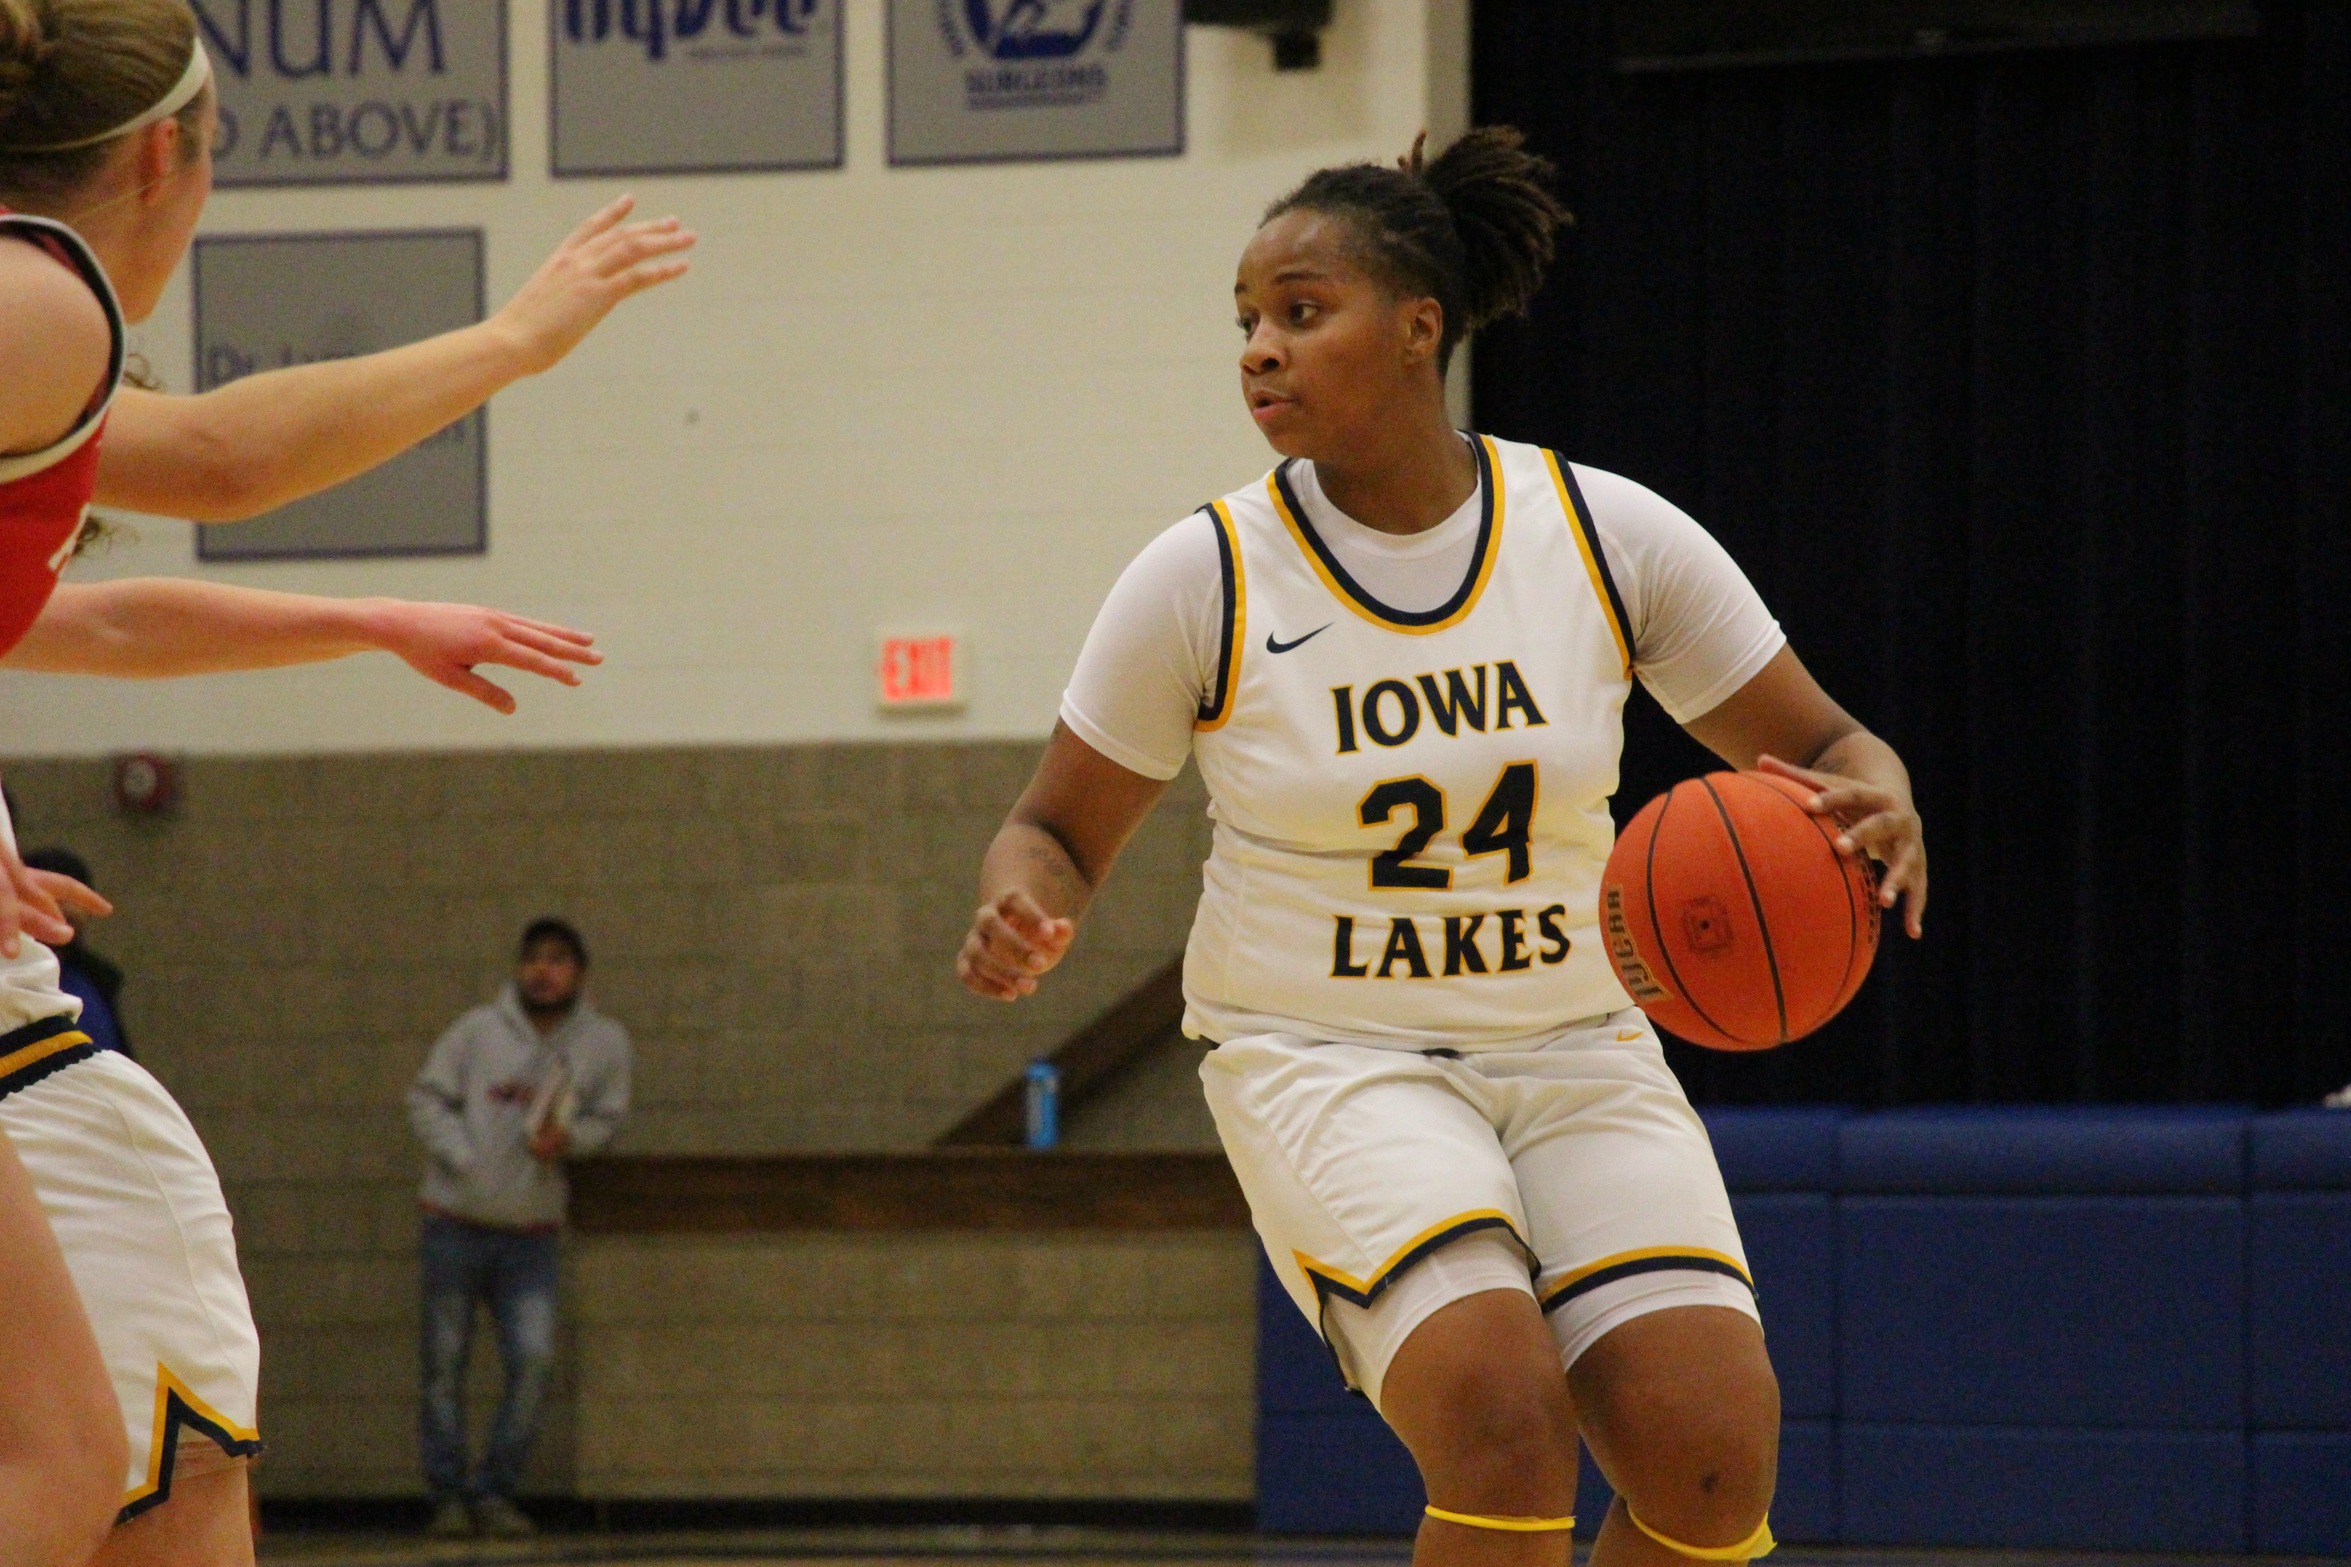 Lakers Fall to Northwestern JV